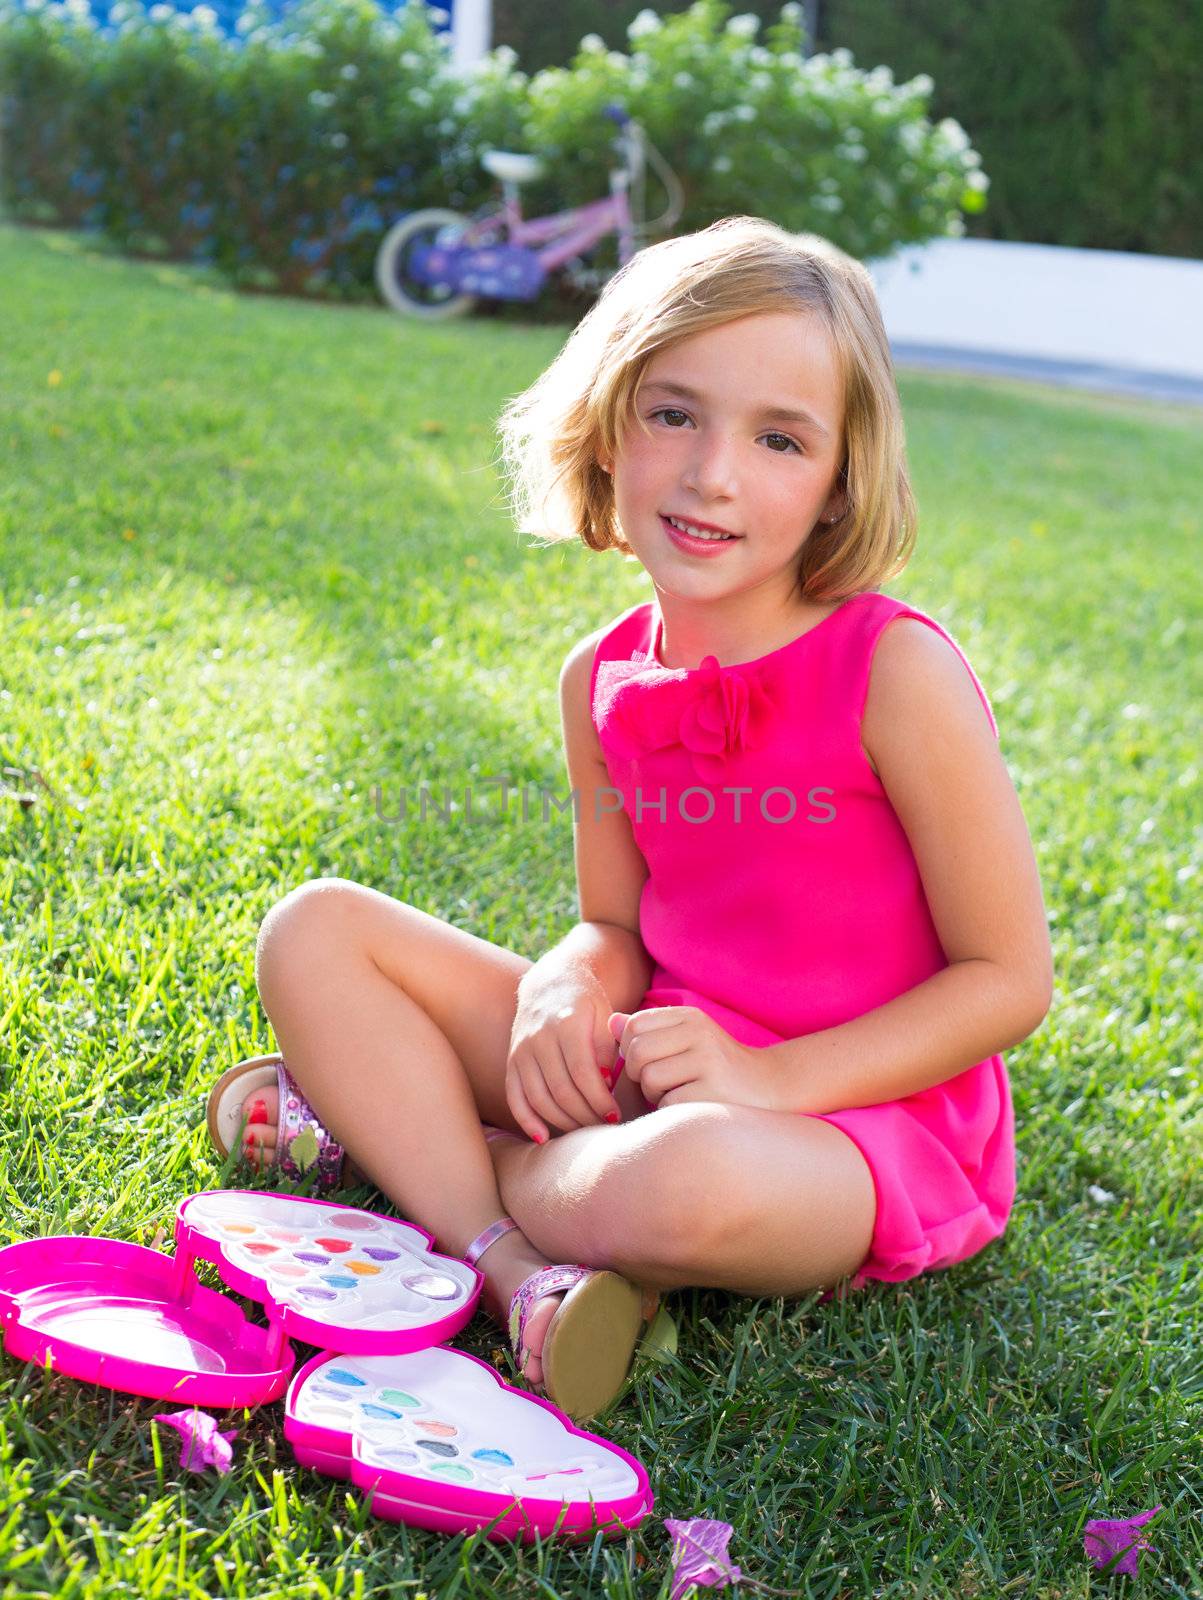 child kid girl playing with makeup set in sitting in garden grass smiling happy